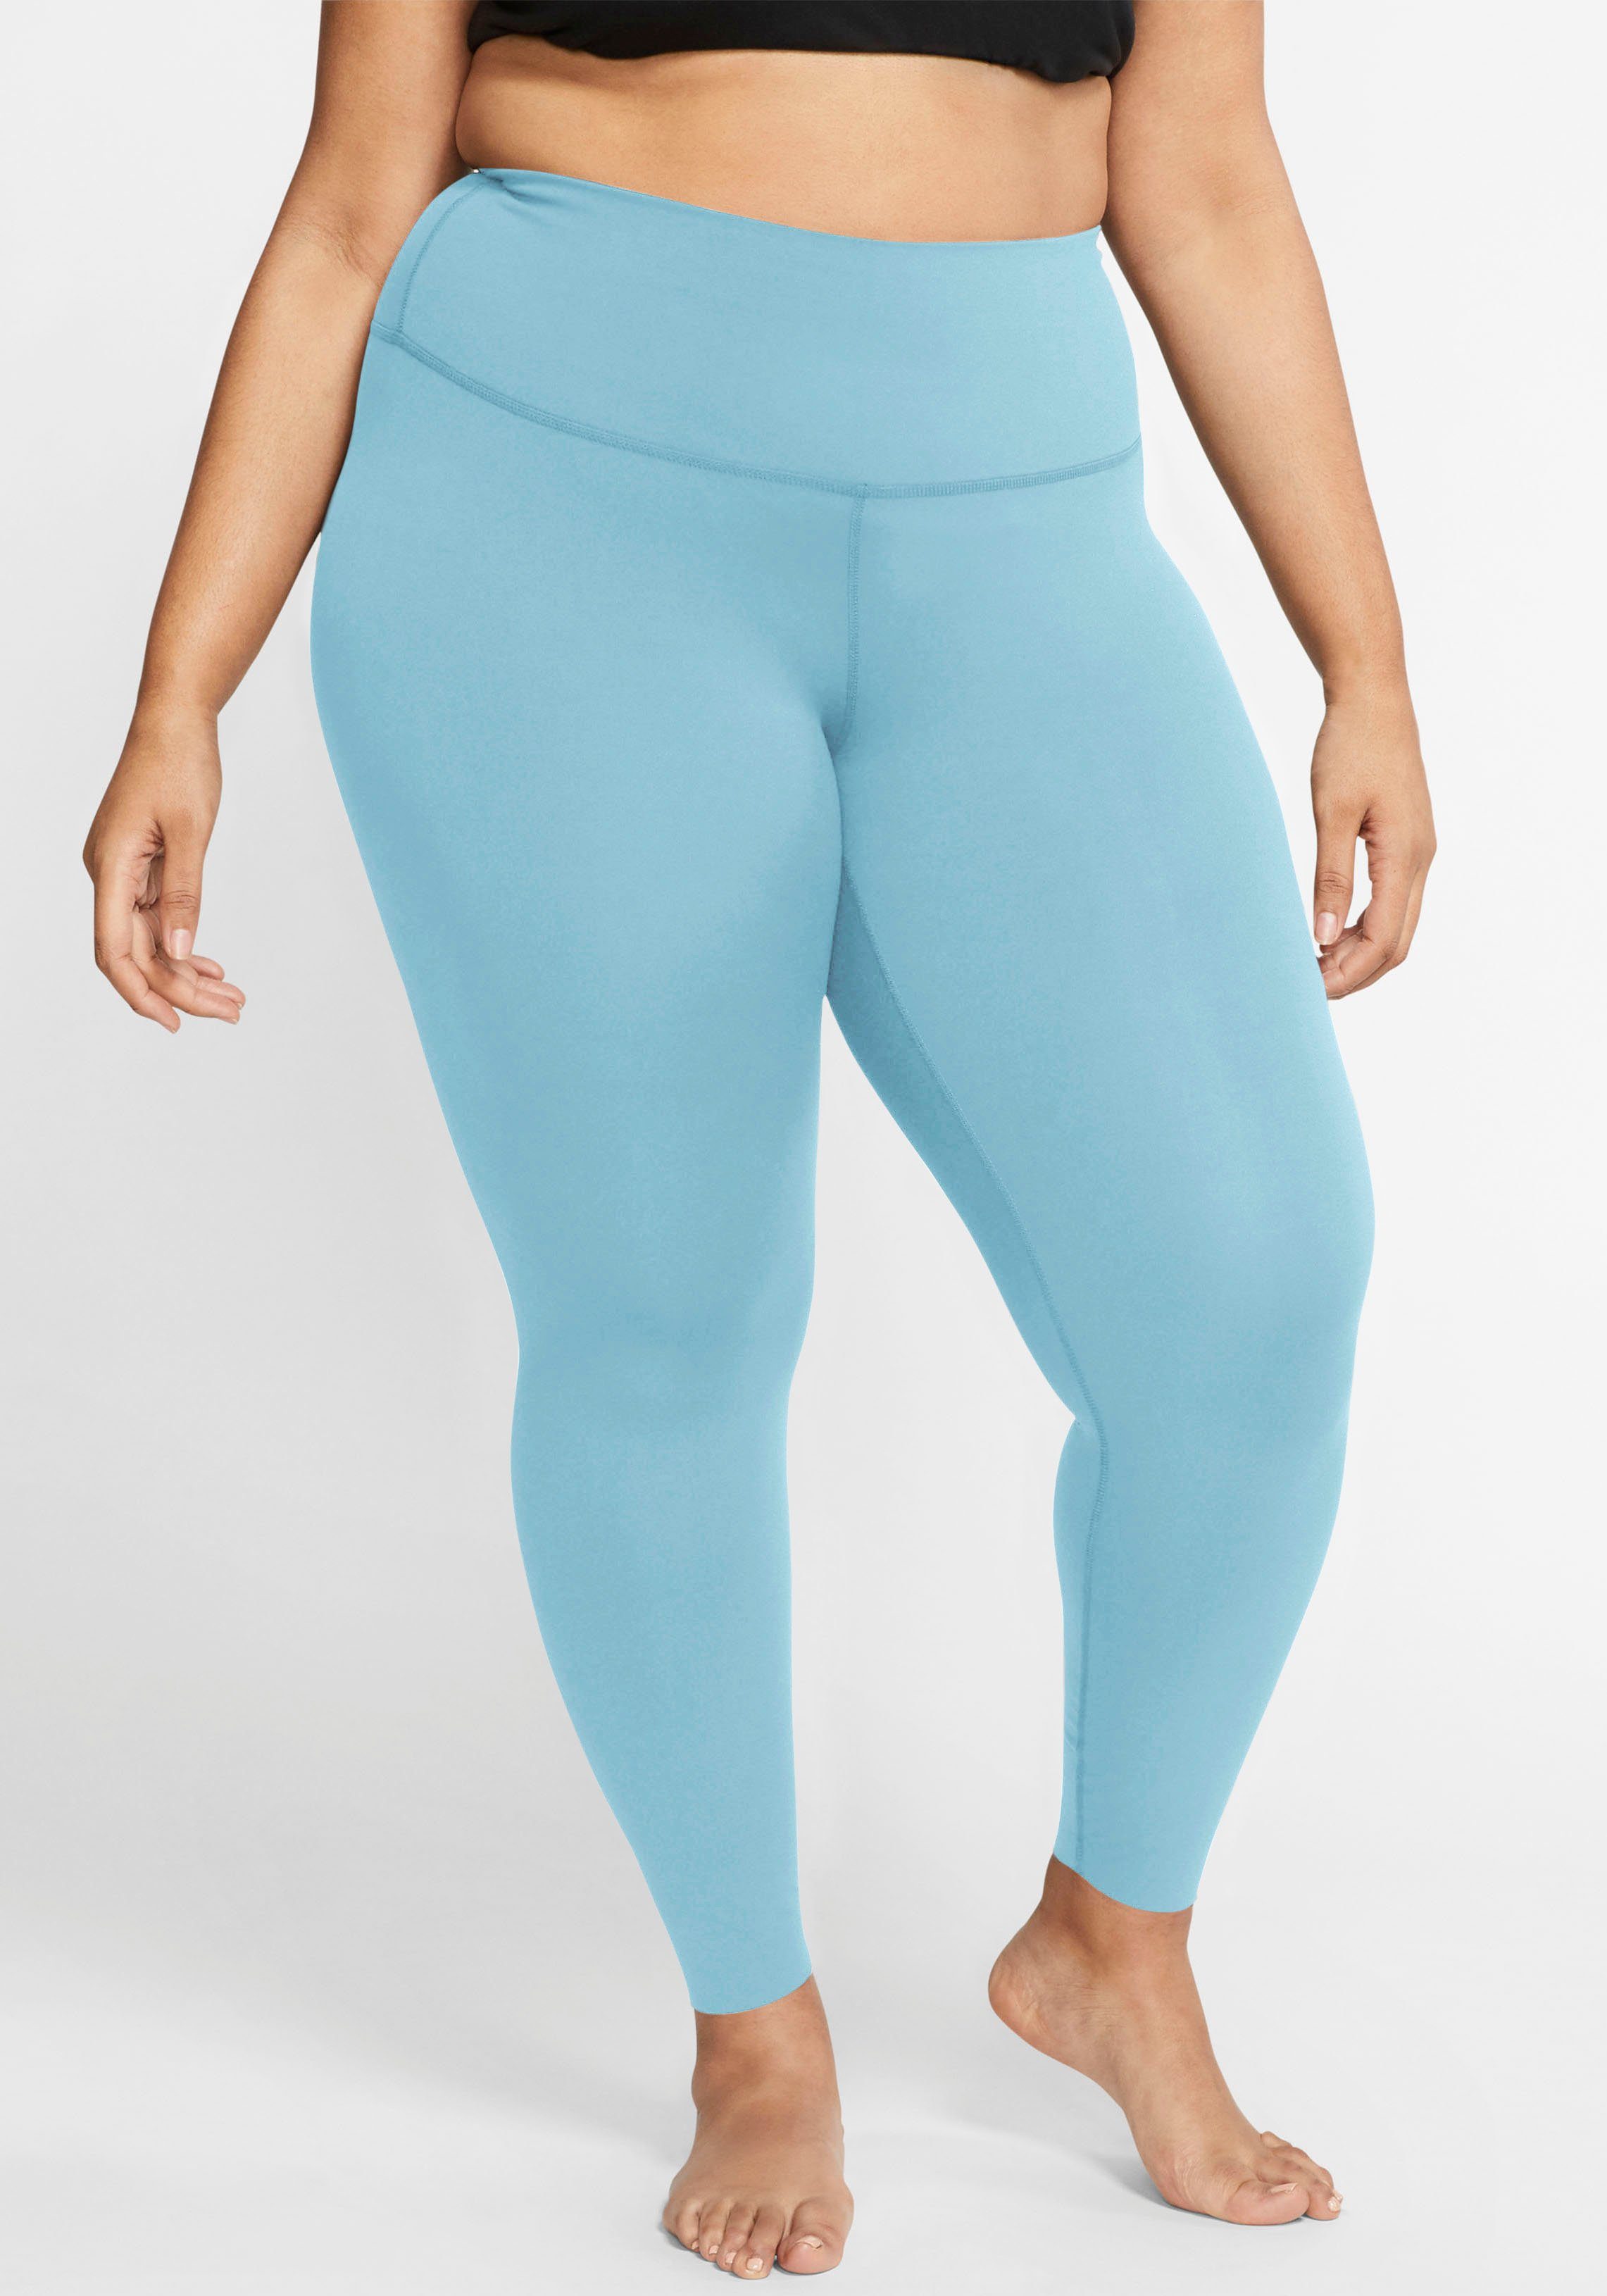 Nike Funktionstights »YOGA WOMENS 7/8 TIGHTS PLUS SIZE« online kaufen | OTTO